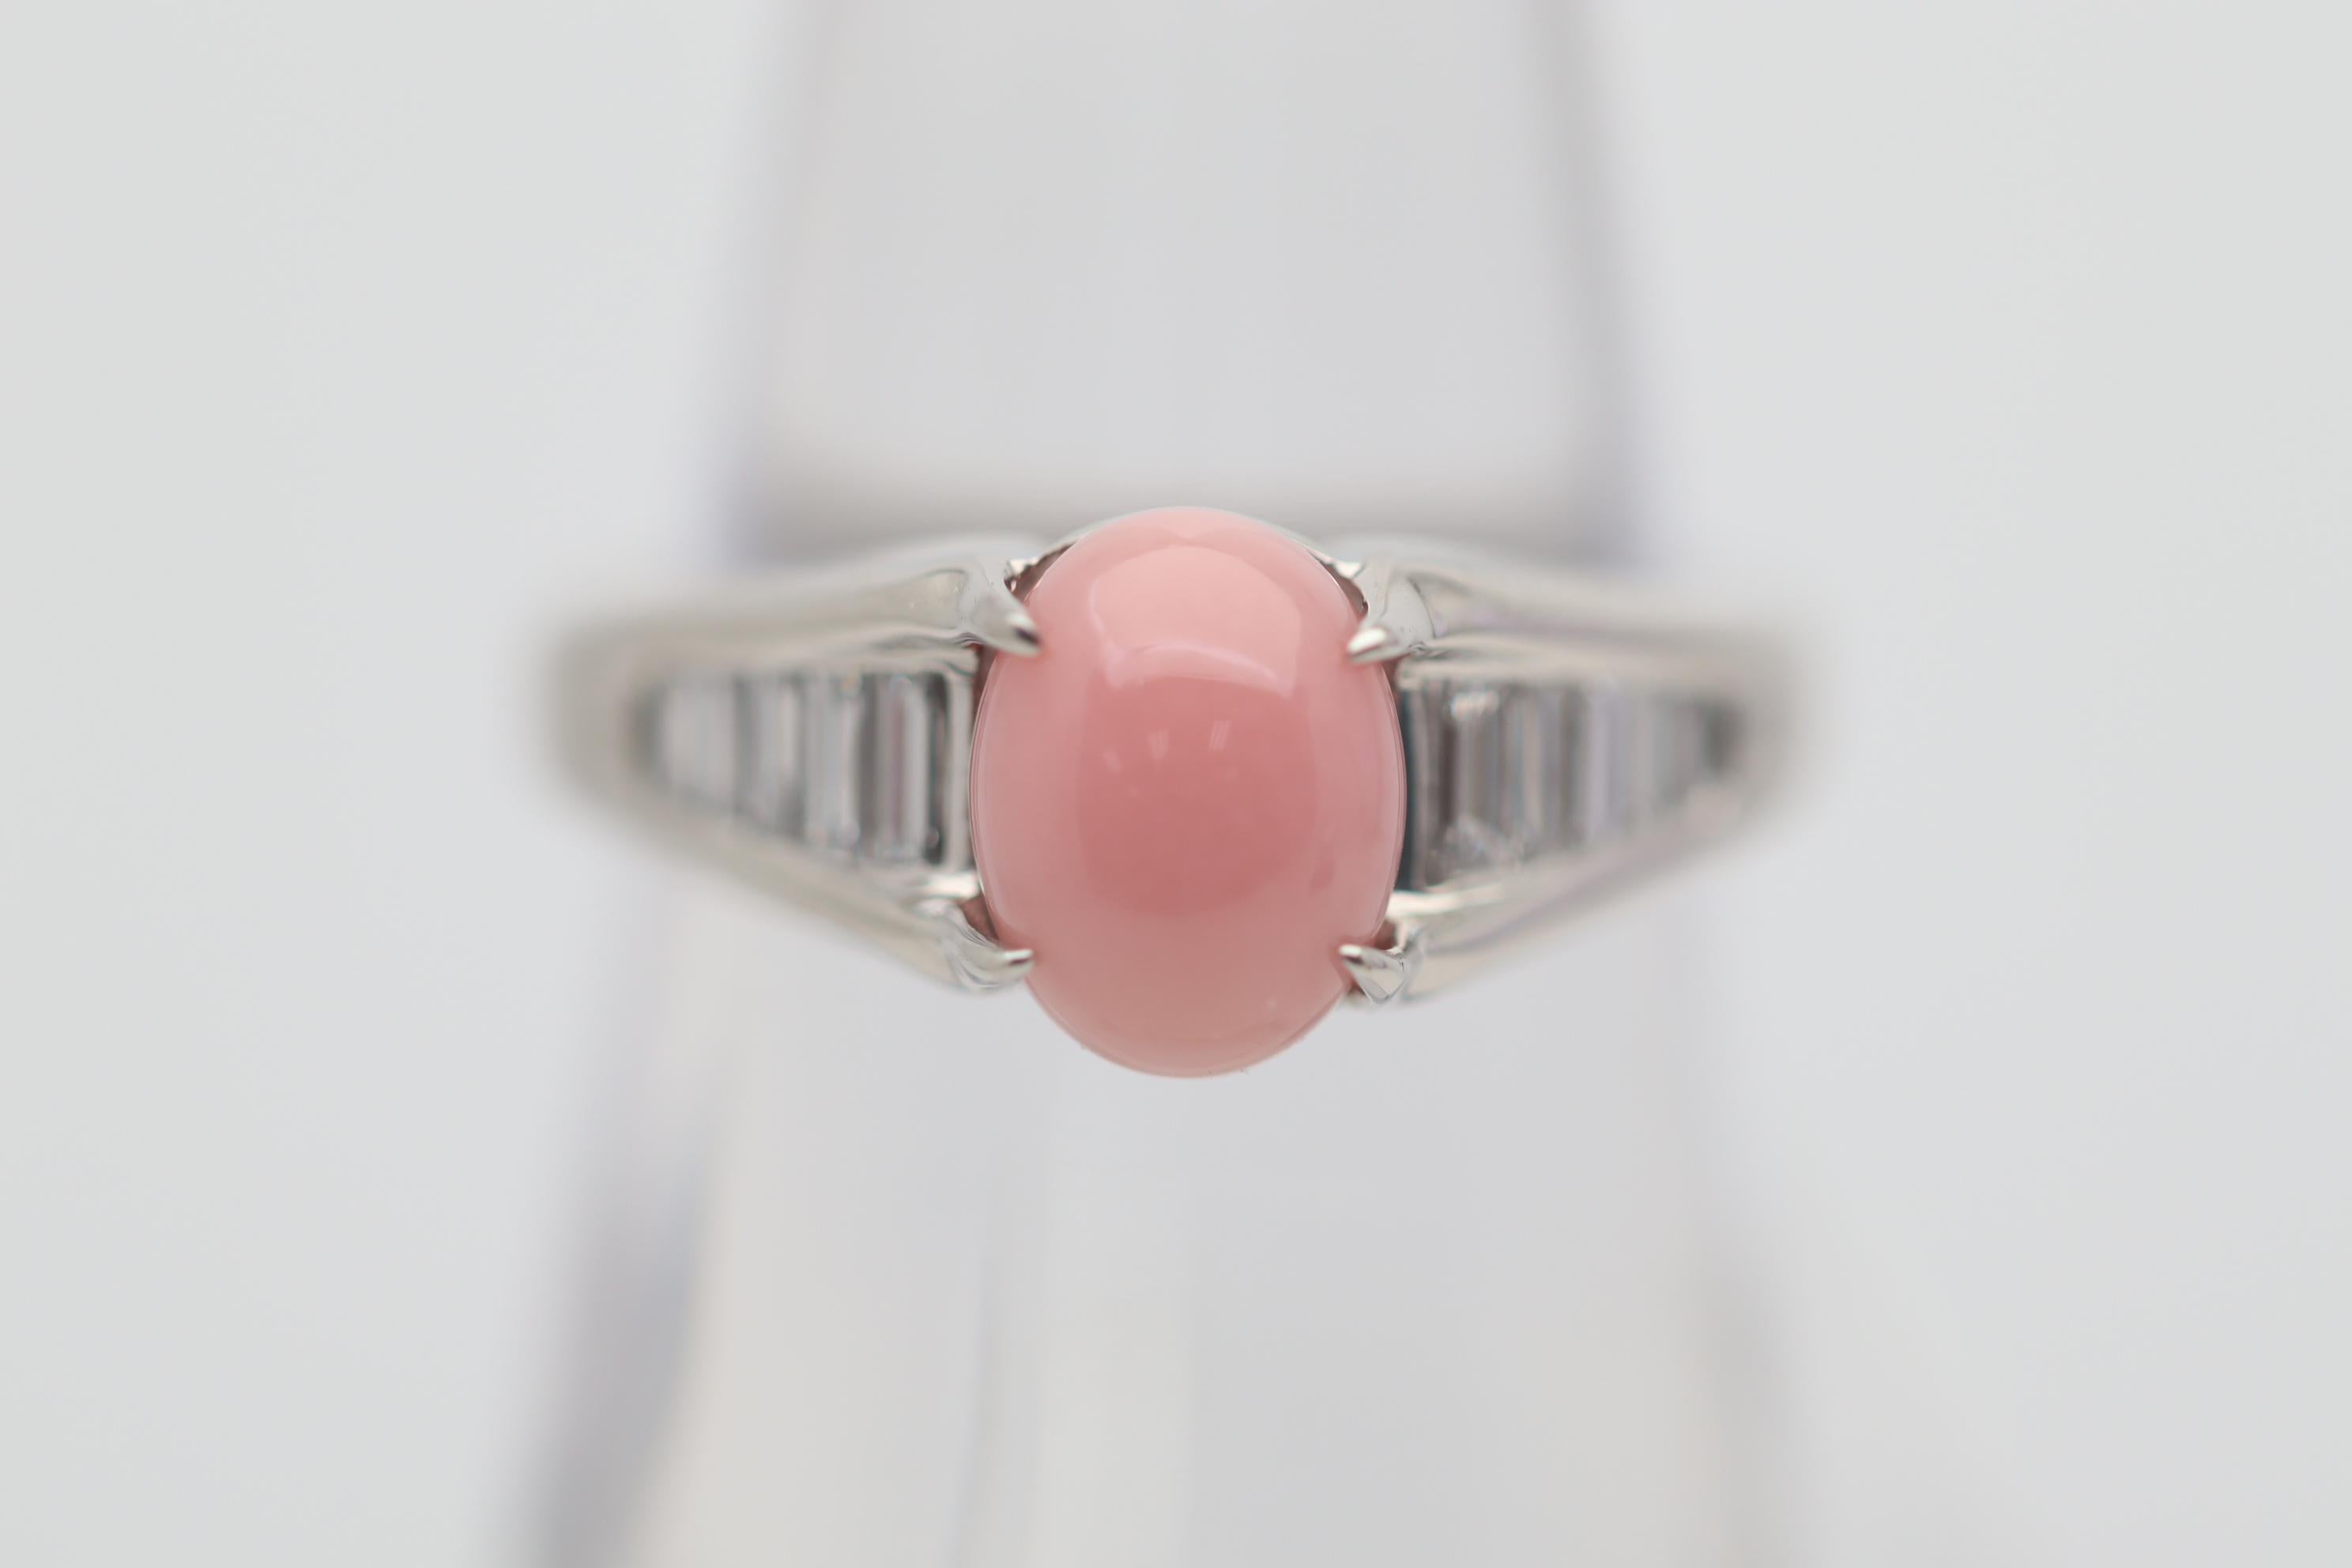 A chic and elegant ring featuring a fine conch pearl weighing 2.49 carats. It has the ideal pure and even pink color with a fine flame pattern which rolls across the pearl when a light hits it. It is complemented by 0.29 carats of baguette-cut